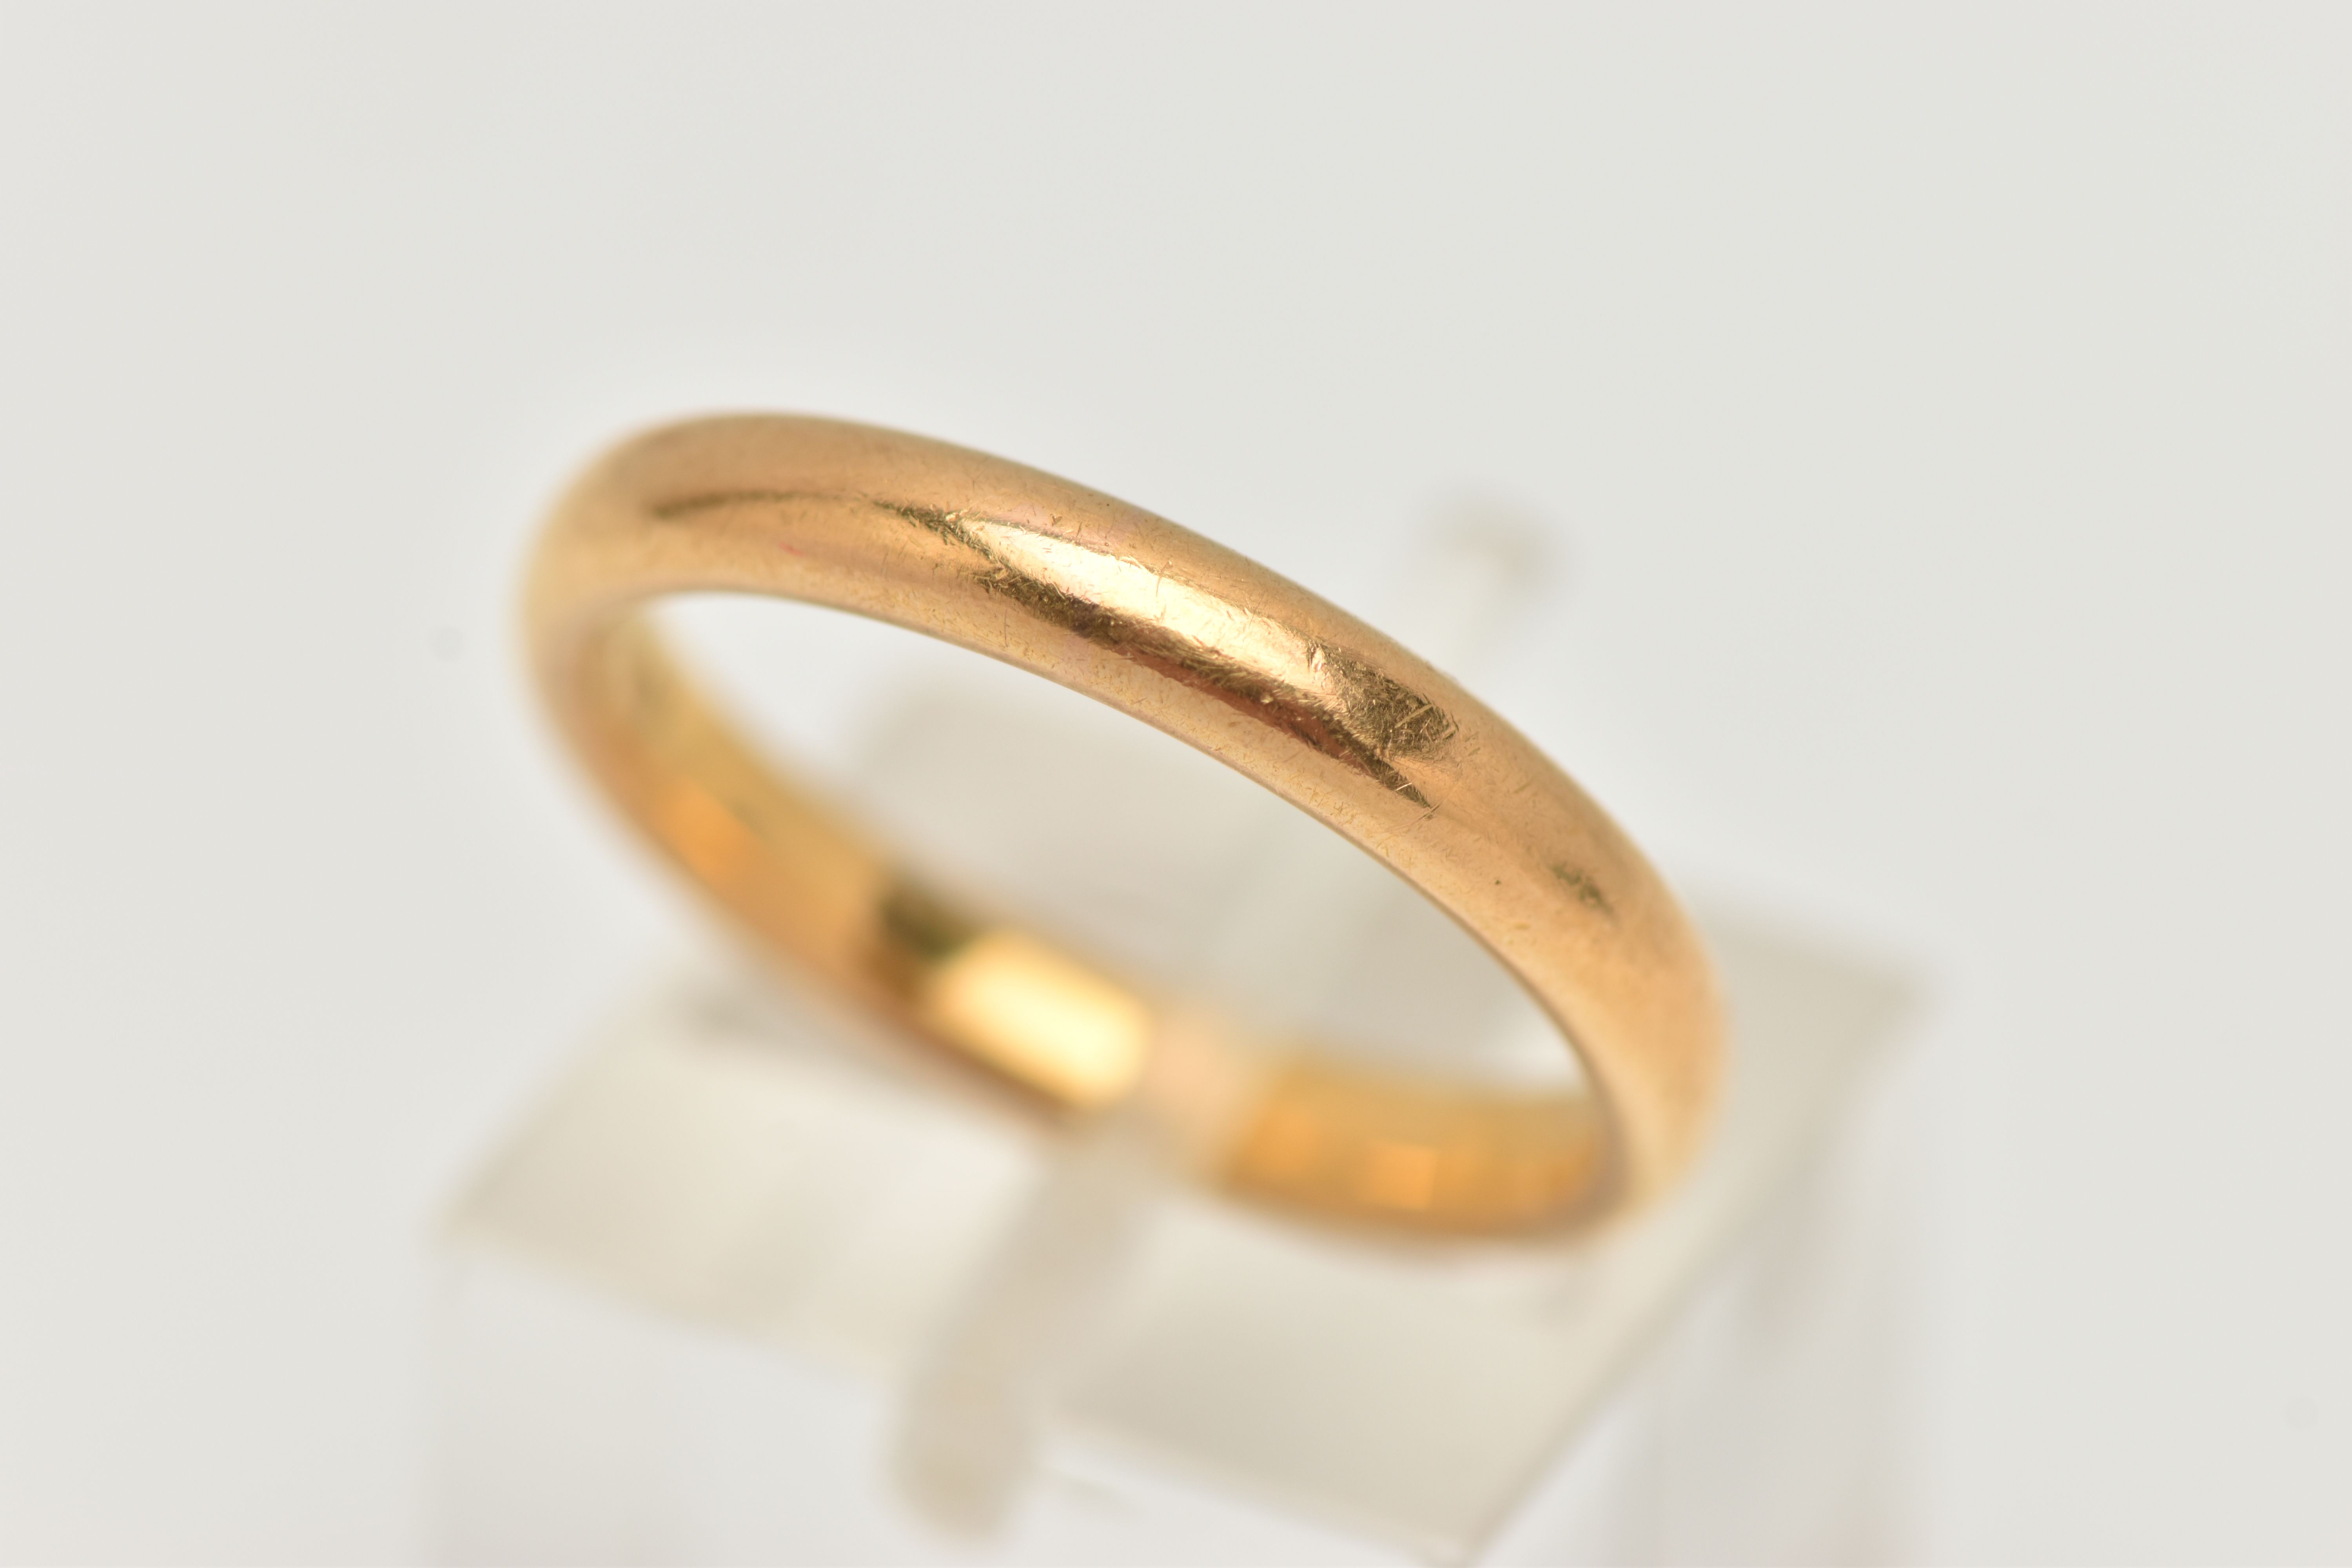 A 22CT GOLD BAND RING, polished band, approximate band width 3.1mm, hallmarked 22ct Birmingham, ring